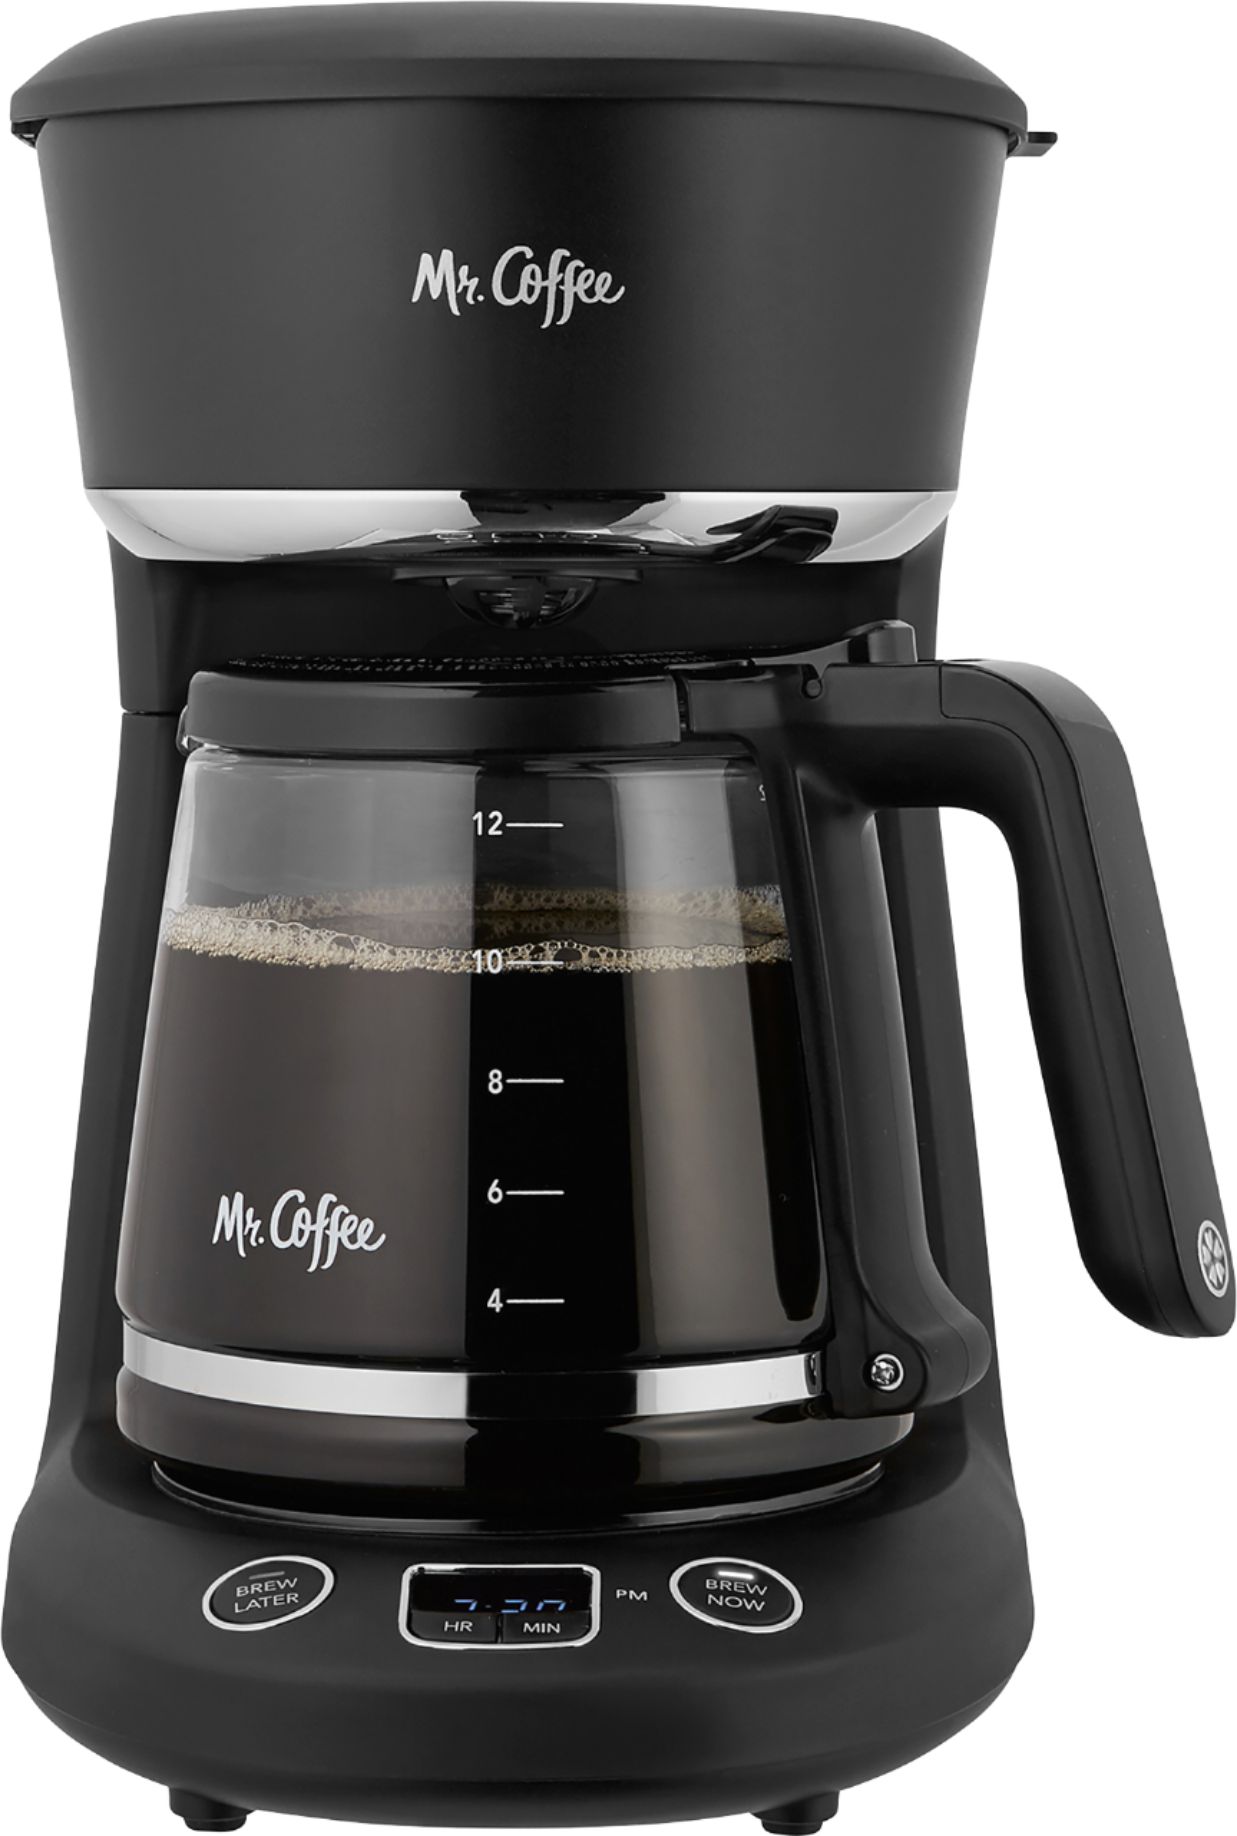 mr coffee 12 cup coffee maker white